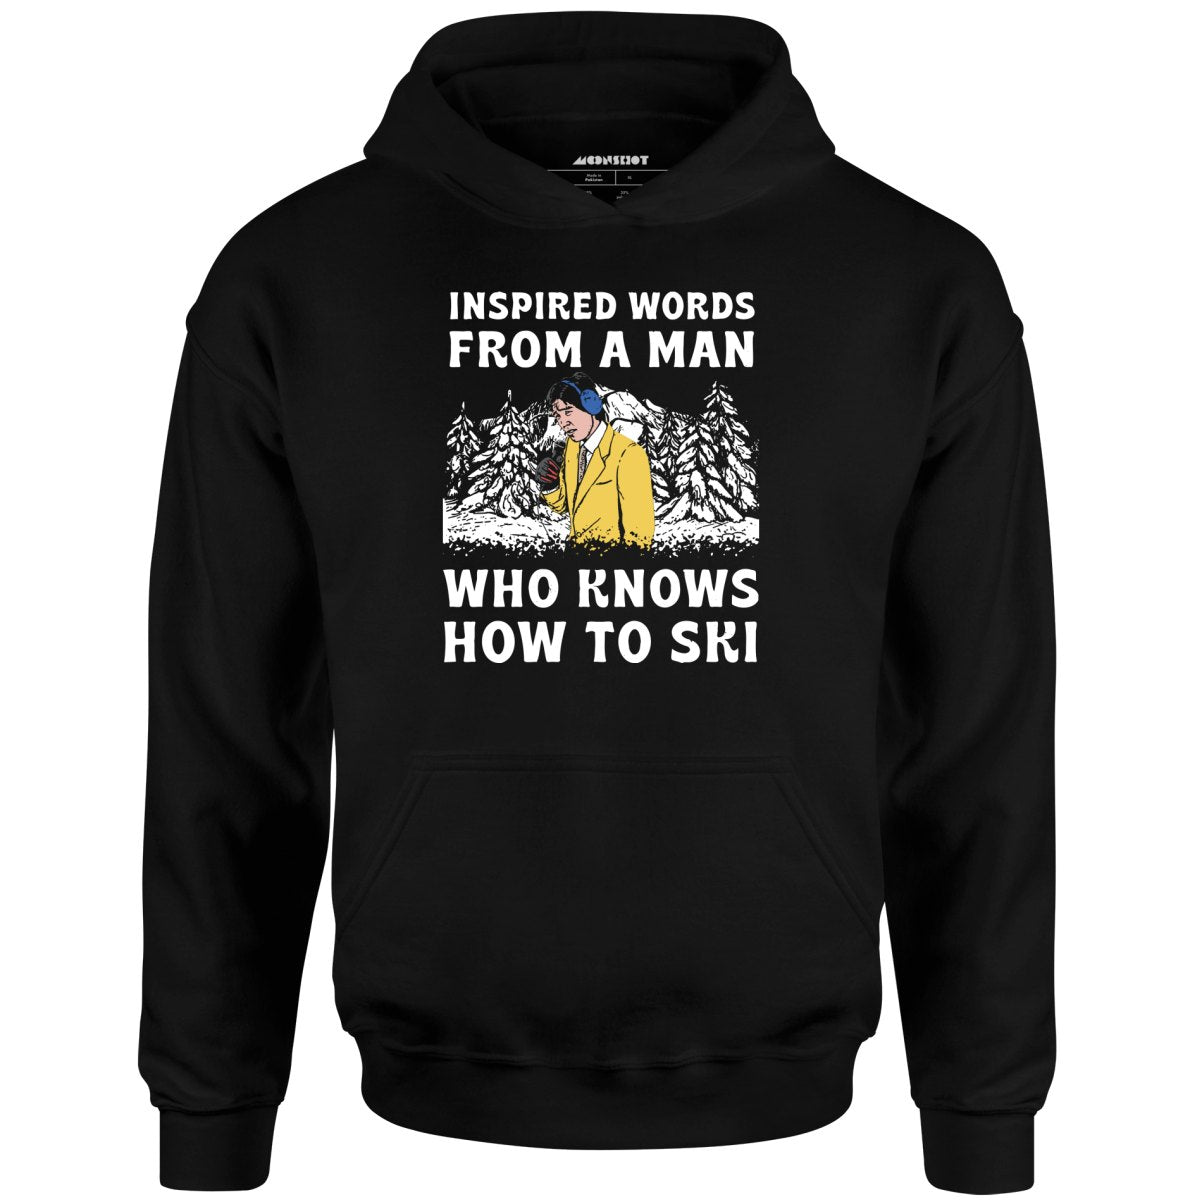 Inspired Words From a Man Who Knows How to Ski - Unisex Hoodie